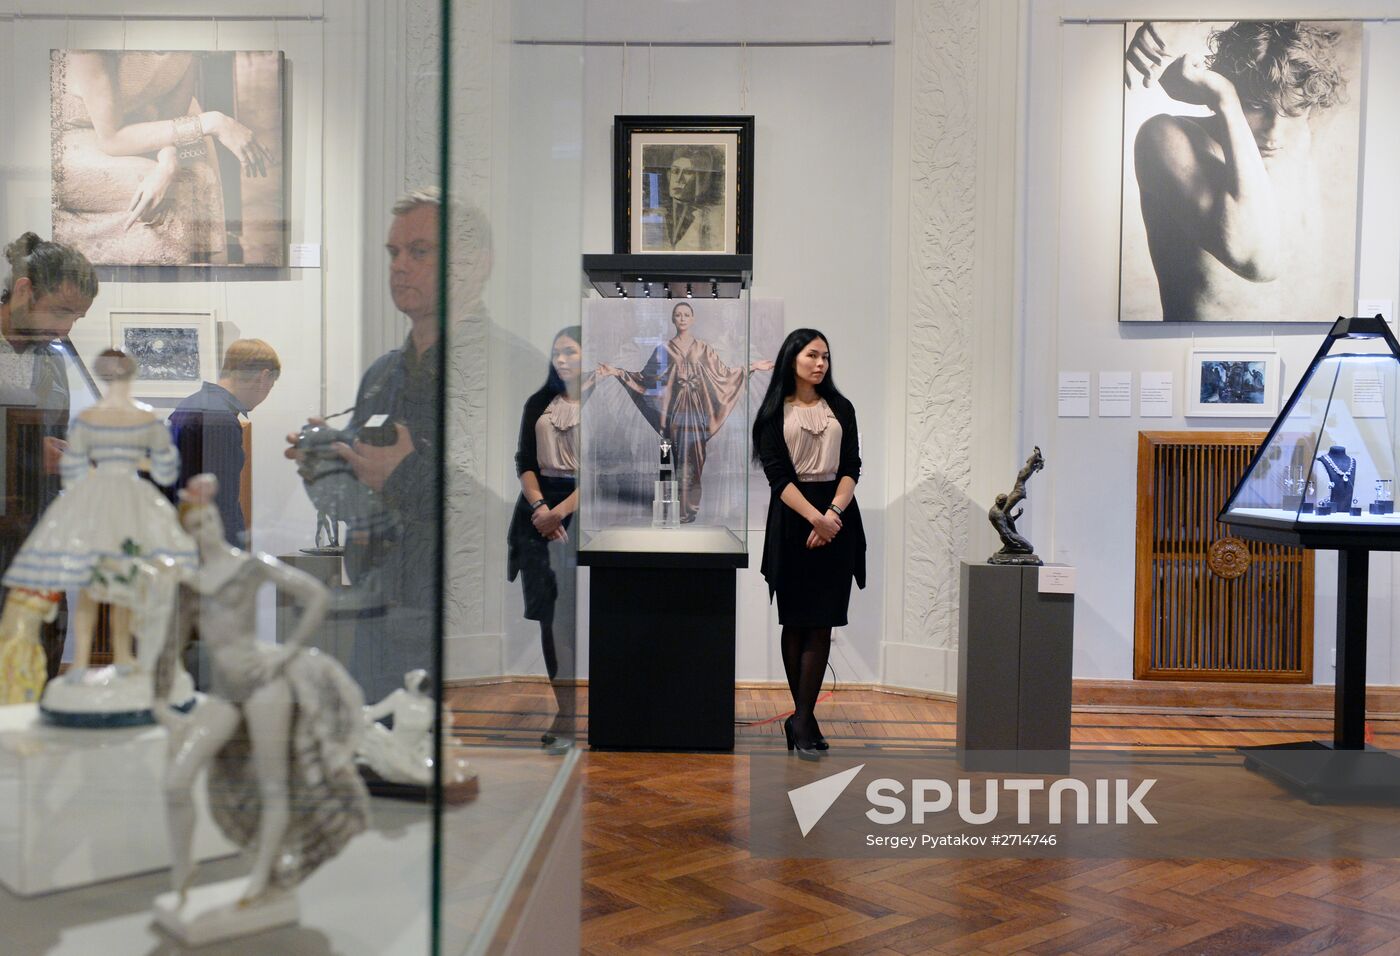 Exhibition "History of Russian Ballet" in Moscow